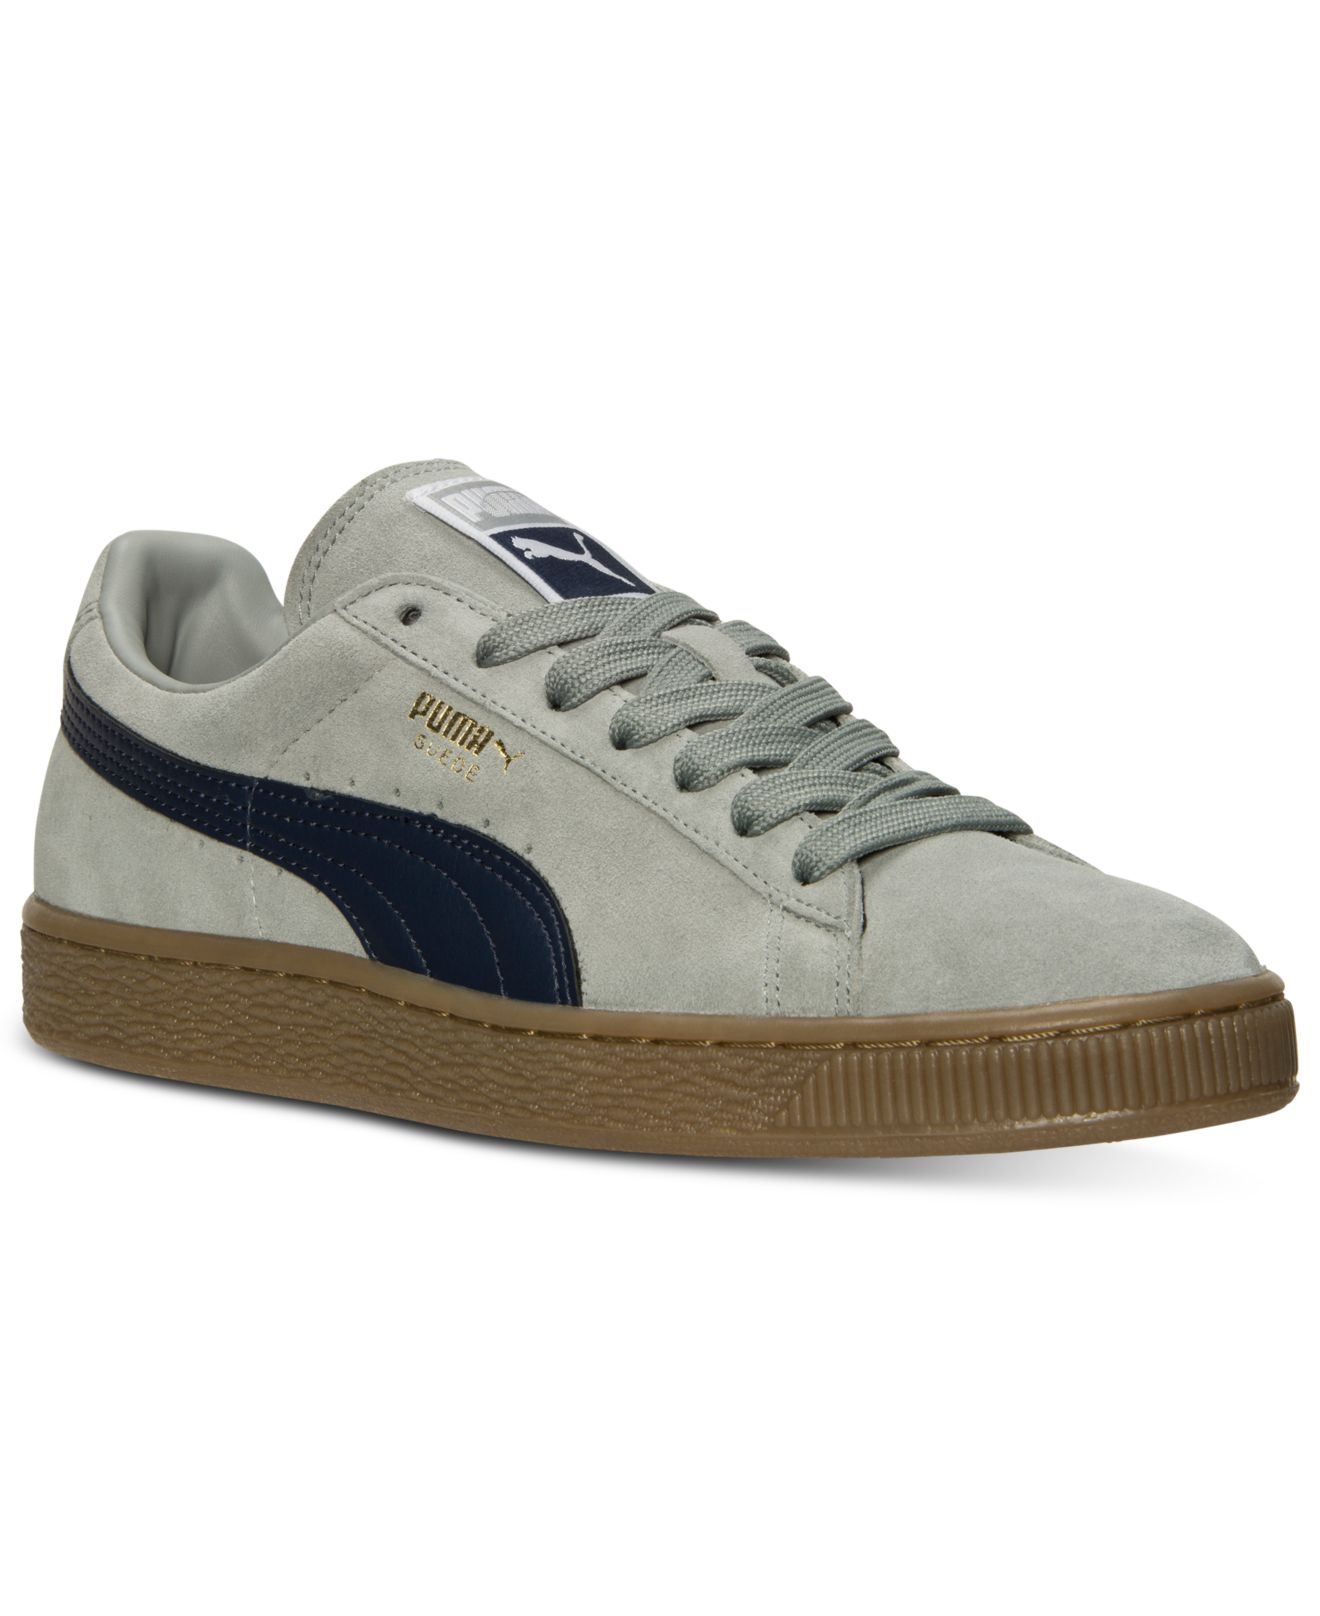 Lyst - Puma Men'S Suede Classic Leather Fs Casual Sneakers From Finish